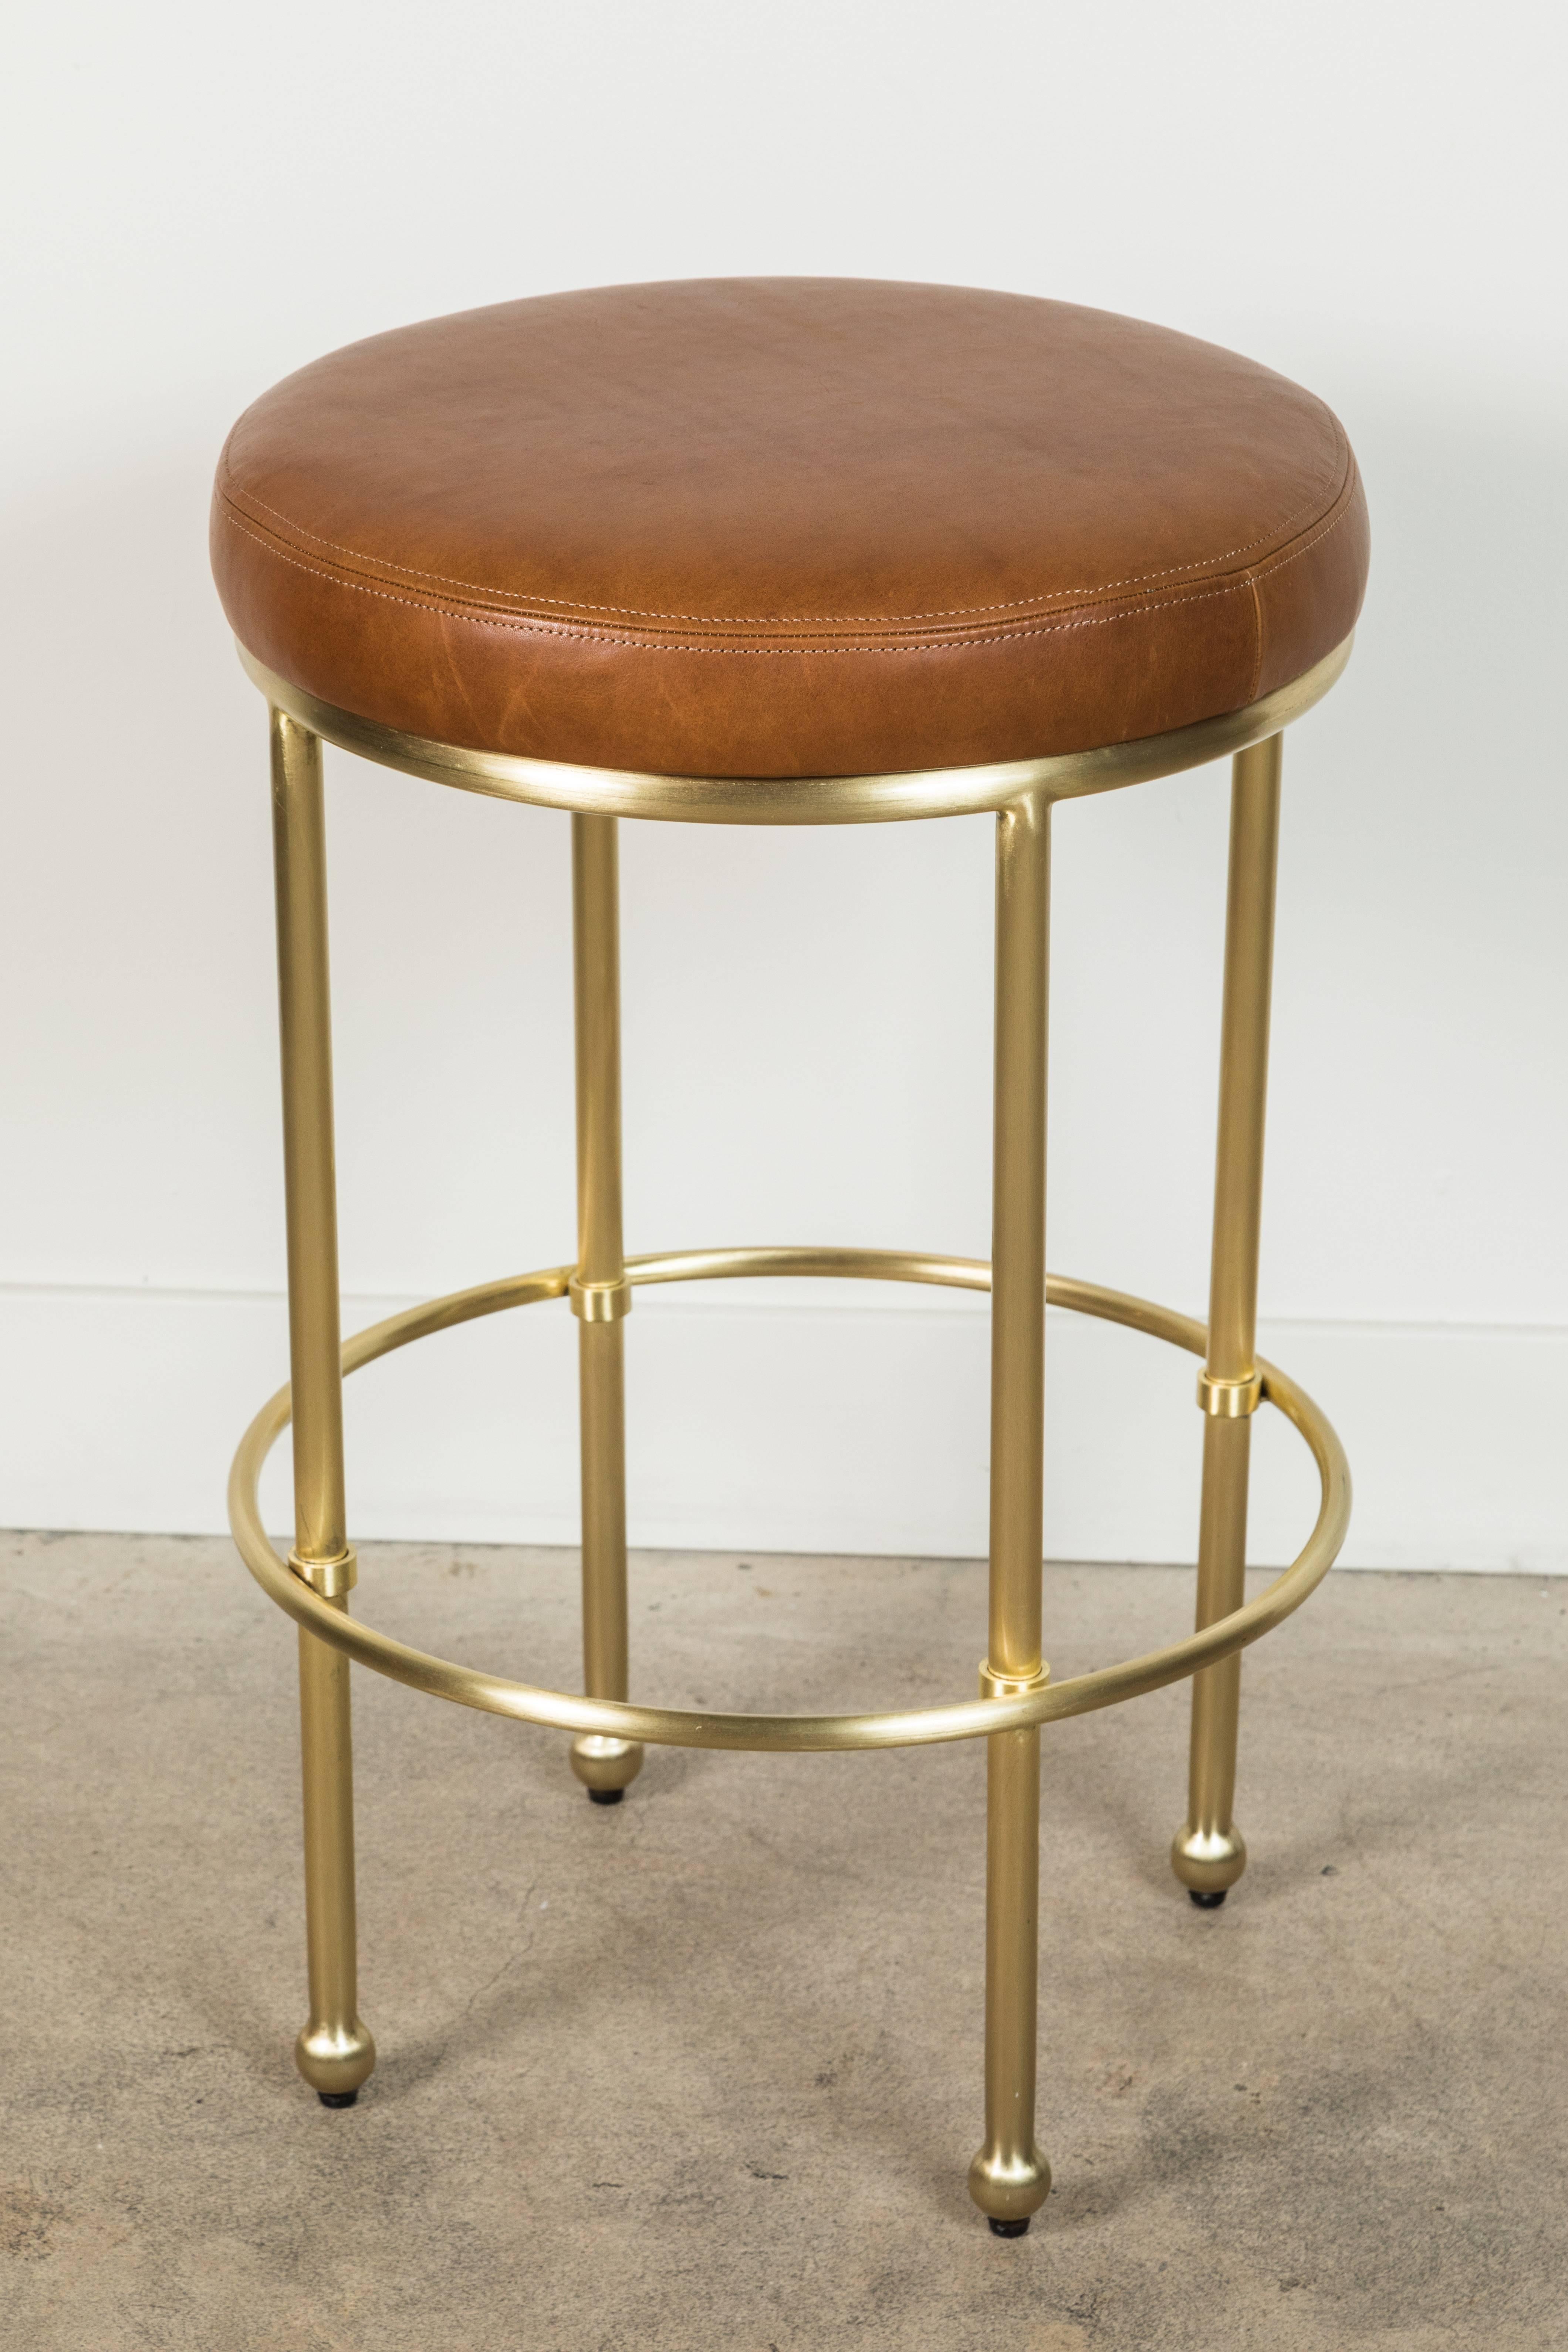 Orsini counterstool by Lawson-Fenning in leather and satin brass.

Available to order in customers own material with a 6-8 week lead time.

As shown: $1,451
To order: $1,325 + COM.